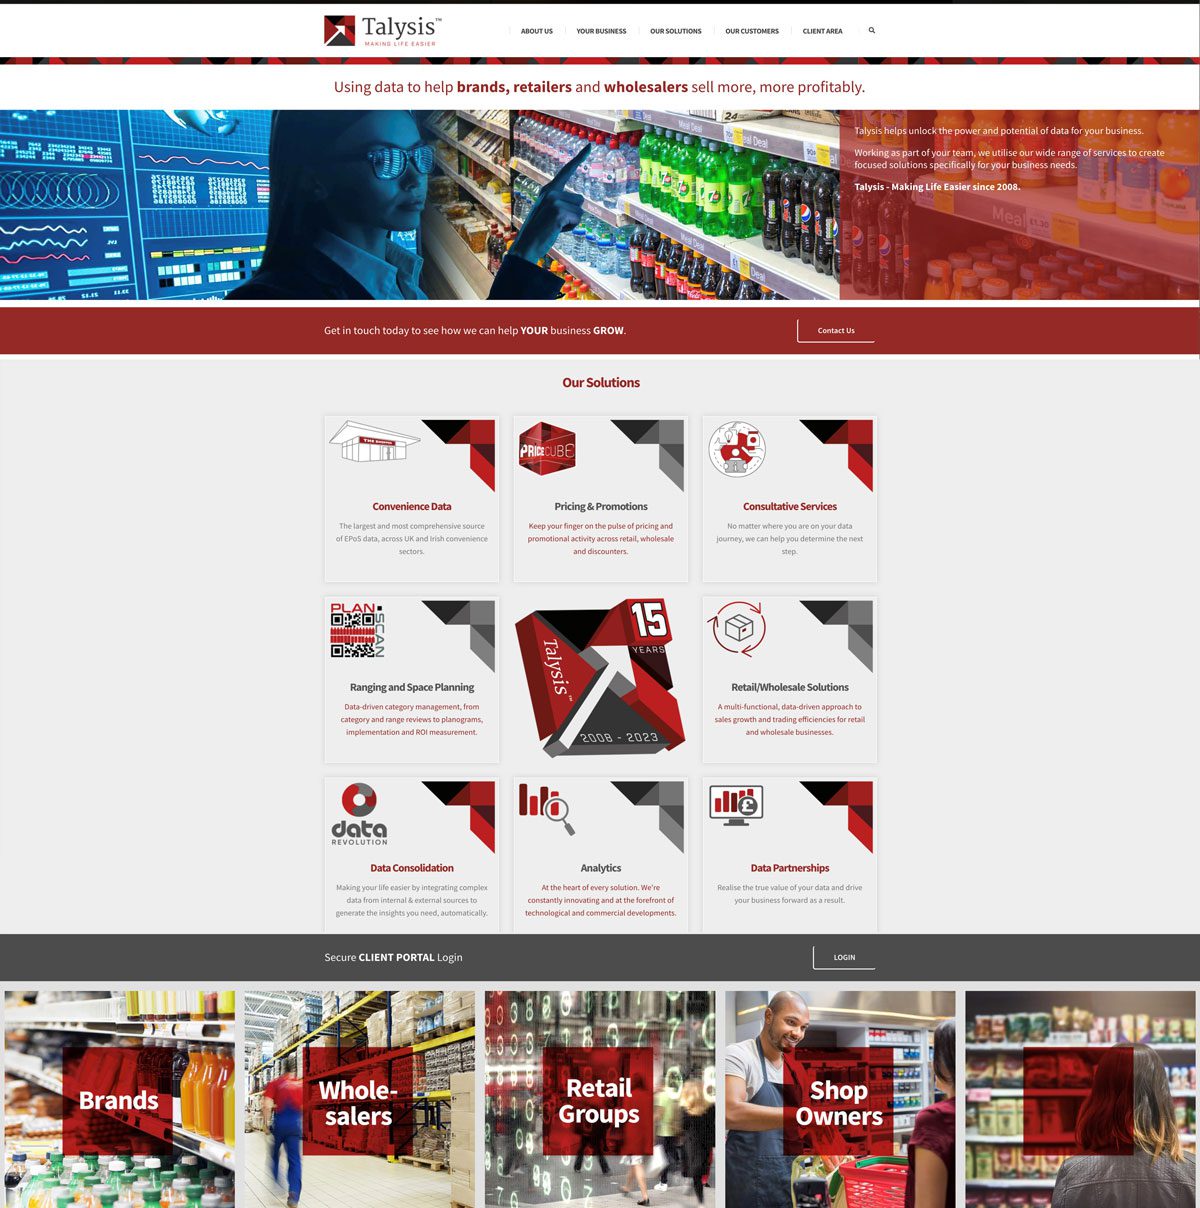 FMCG retail sales data expert Talysis has revamped its website to improve the user experience.